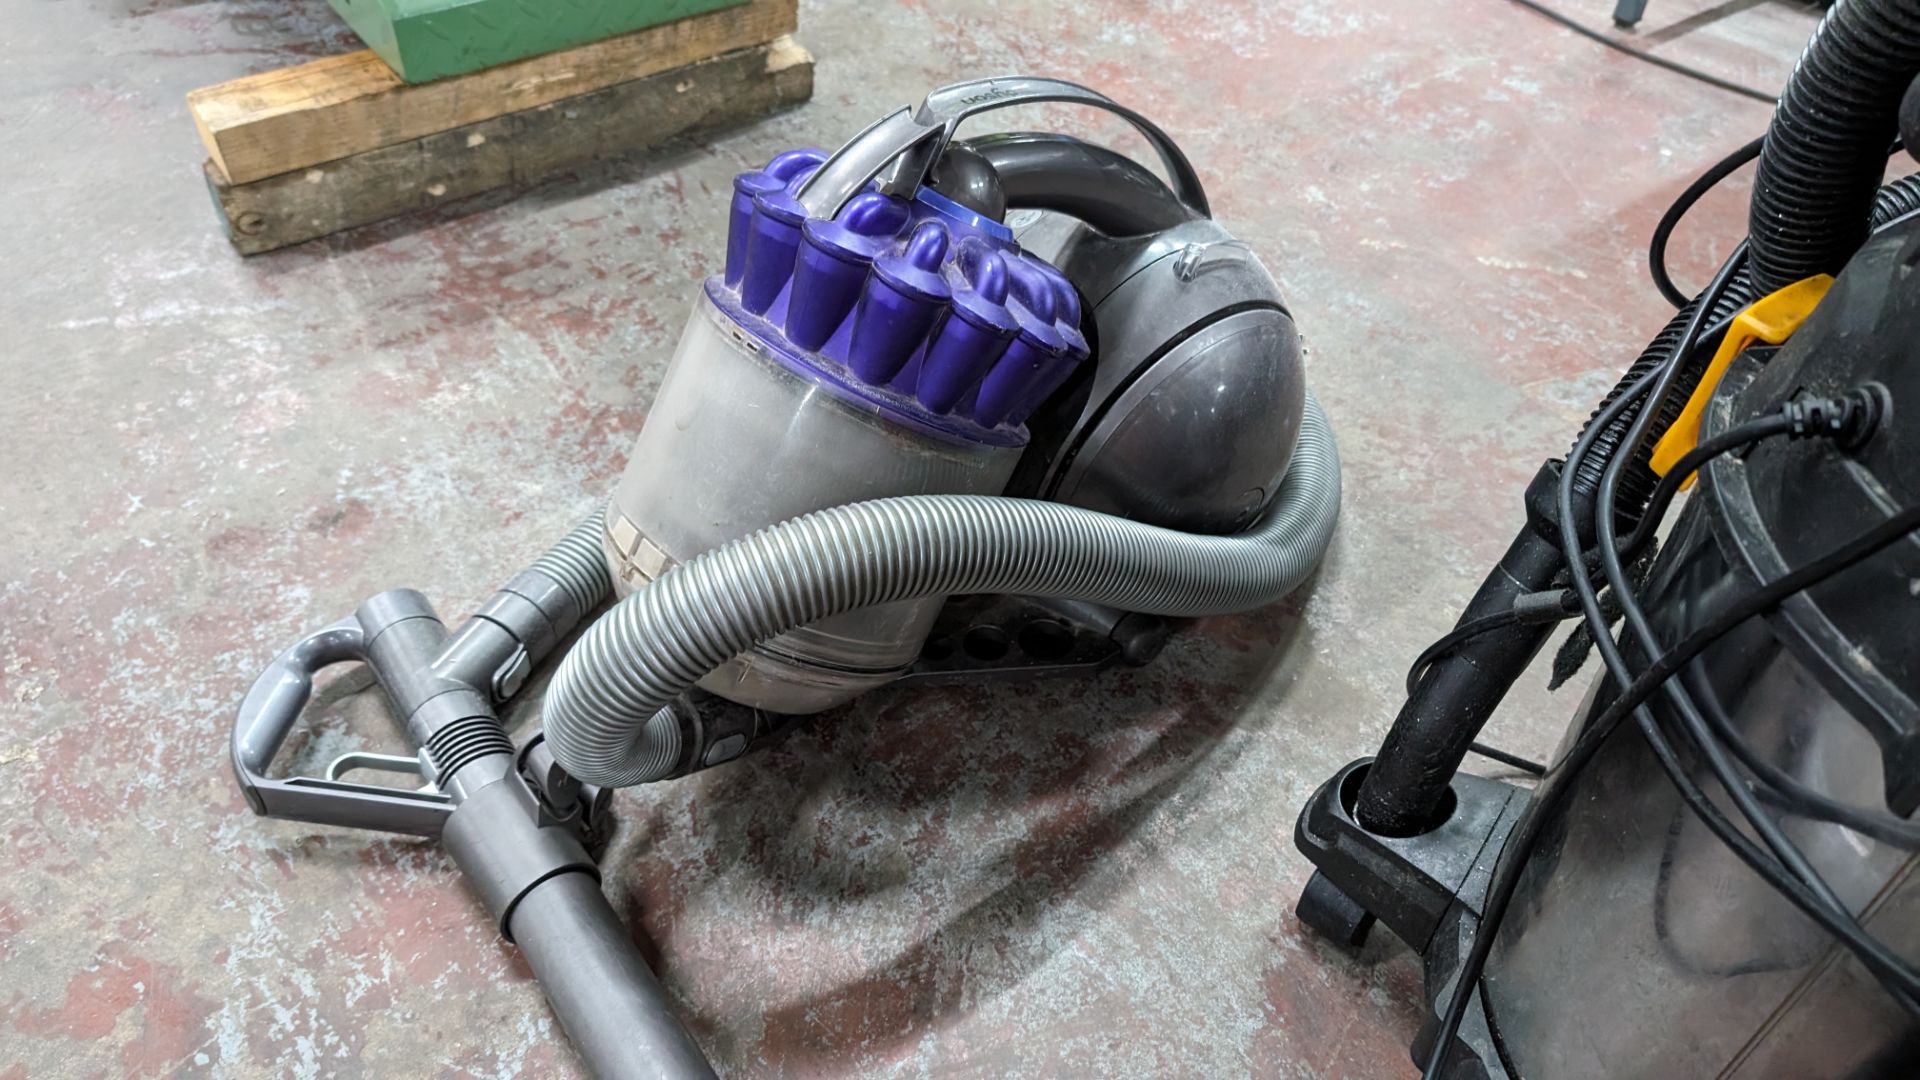 Dyson vacuum cleaner - Image 5 of 7